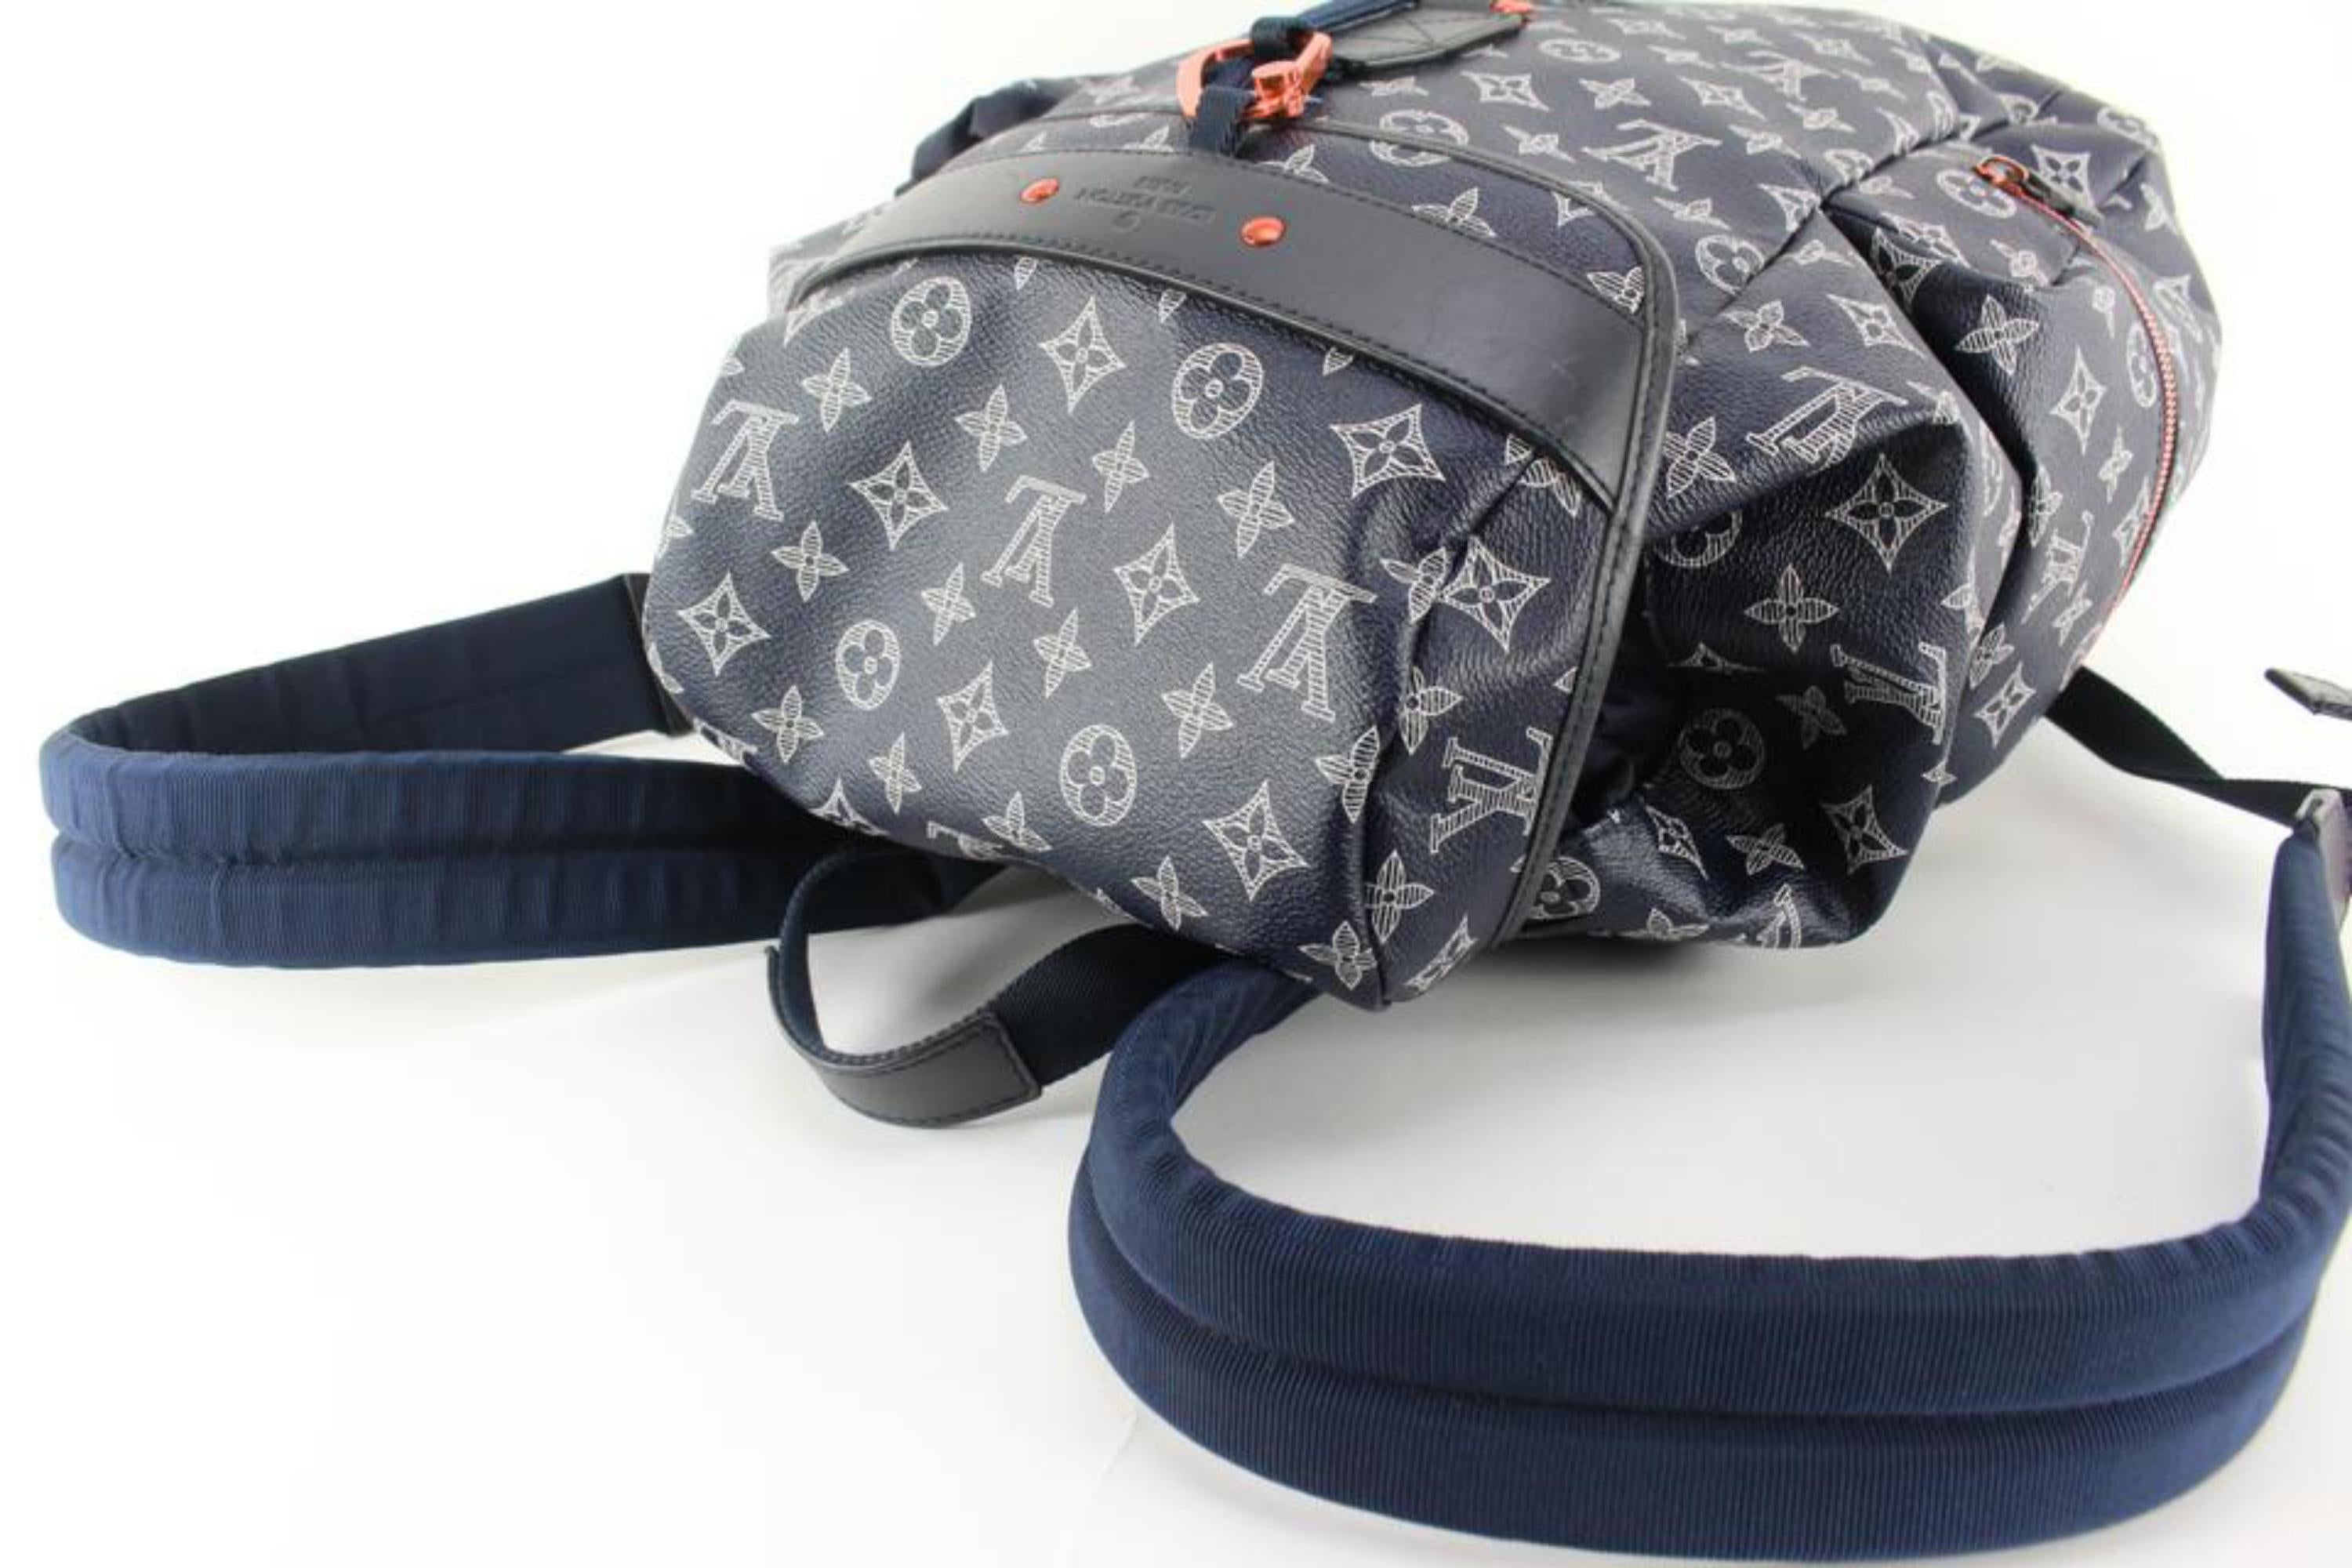 vuitton discovery backpack monogram